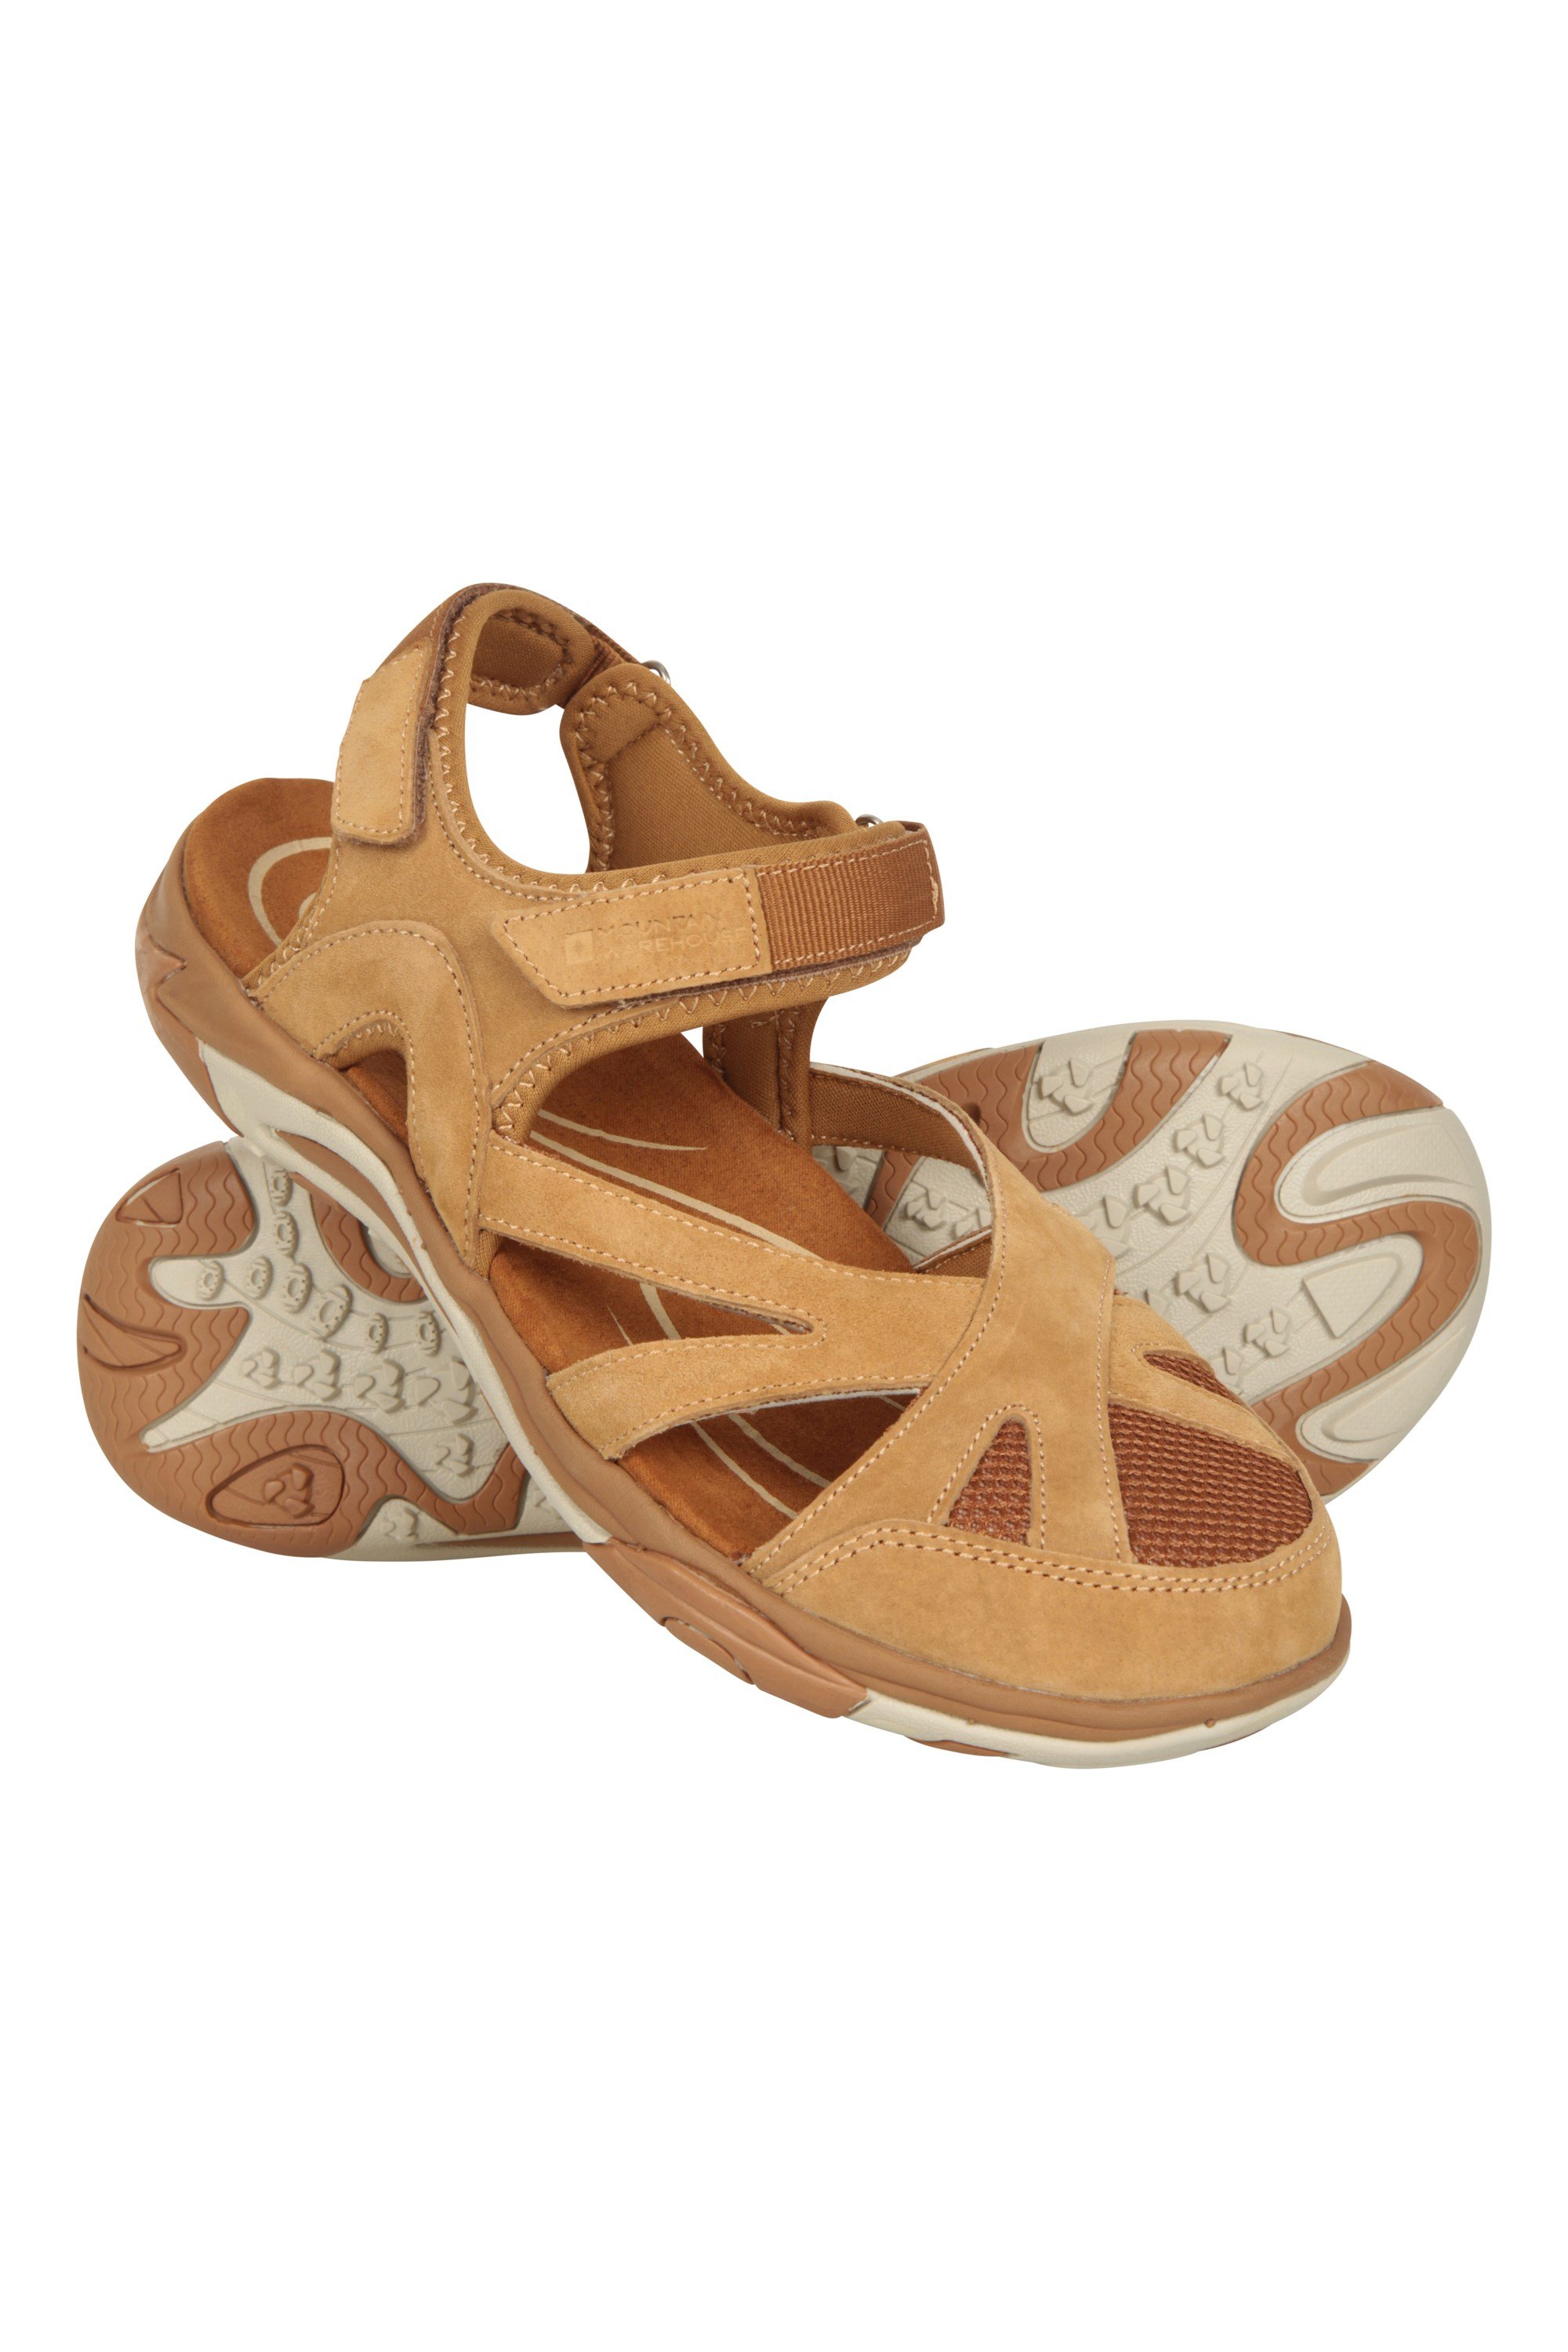 Sussex Womens Covered Sandals - Brown